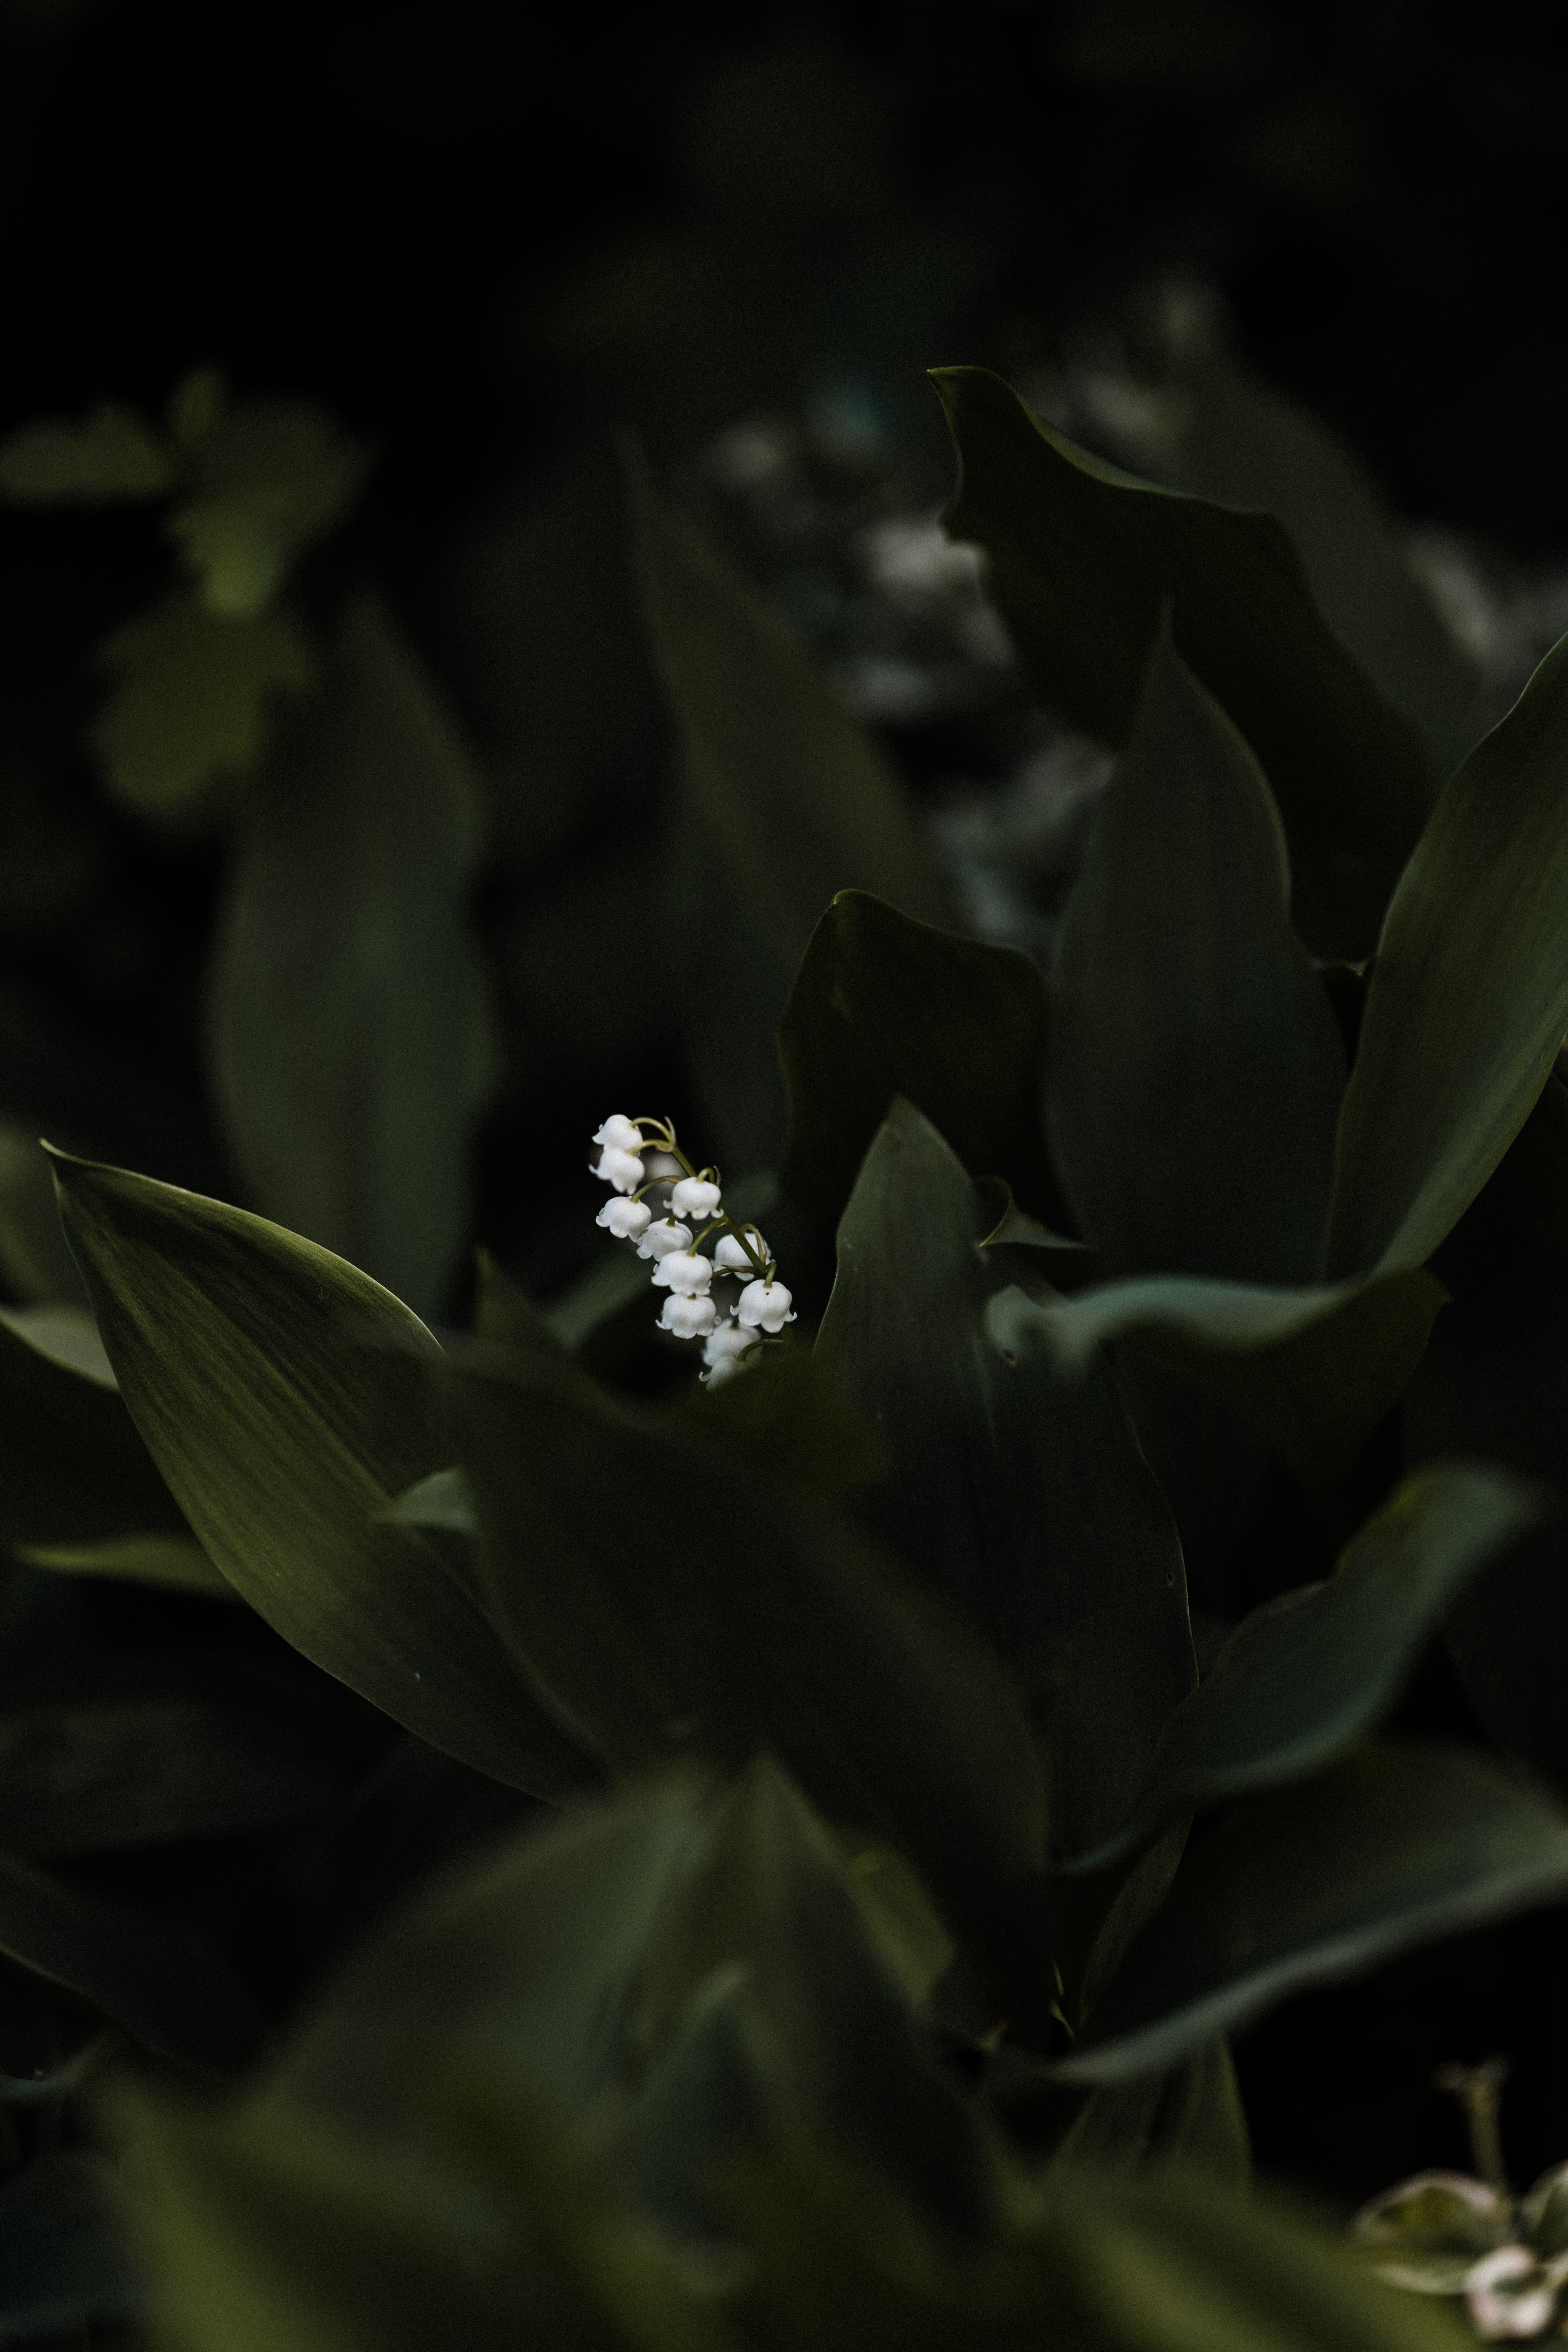 lily of the valley, flowers, leaves, flower, plant